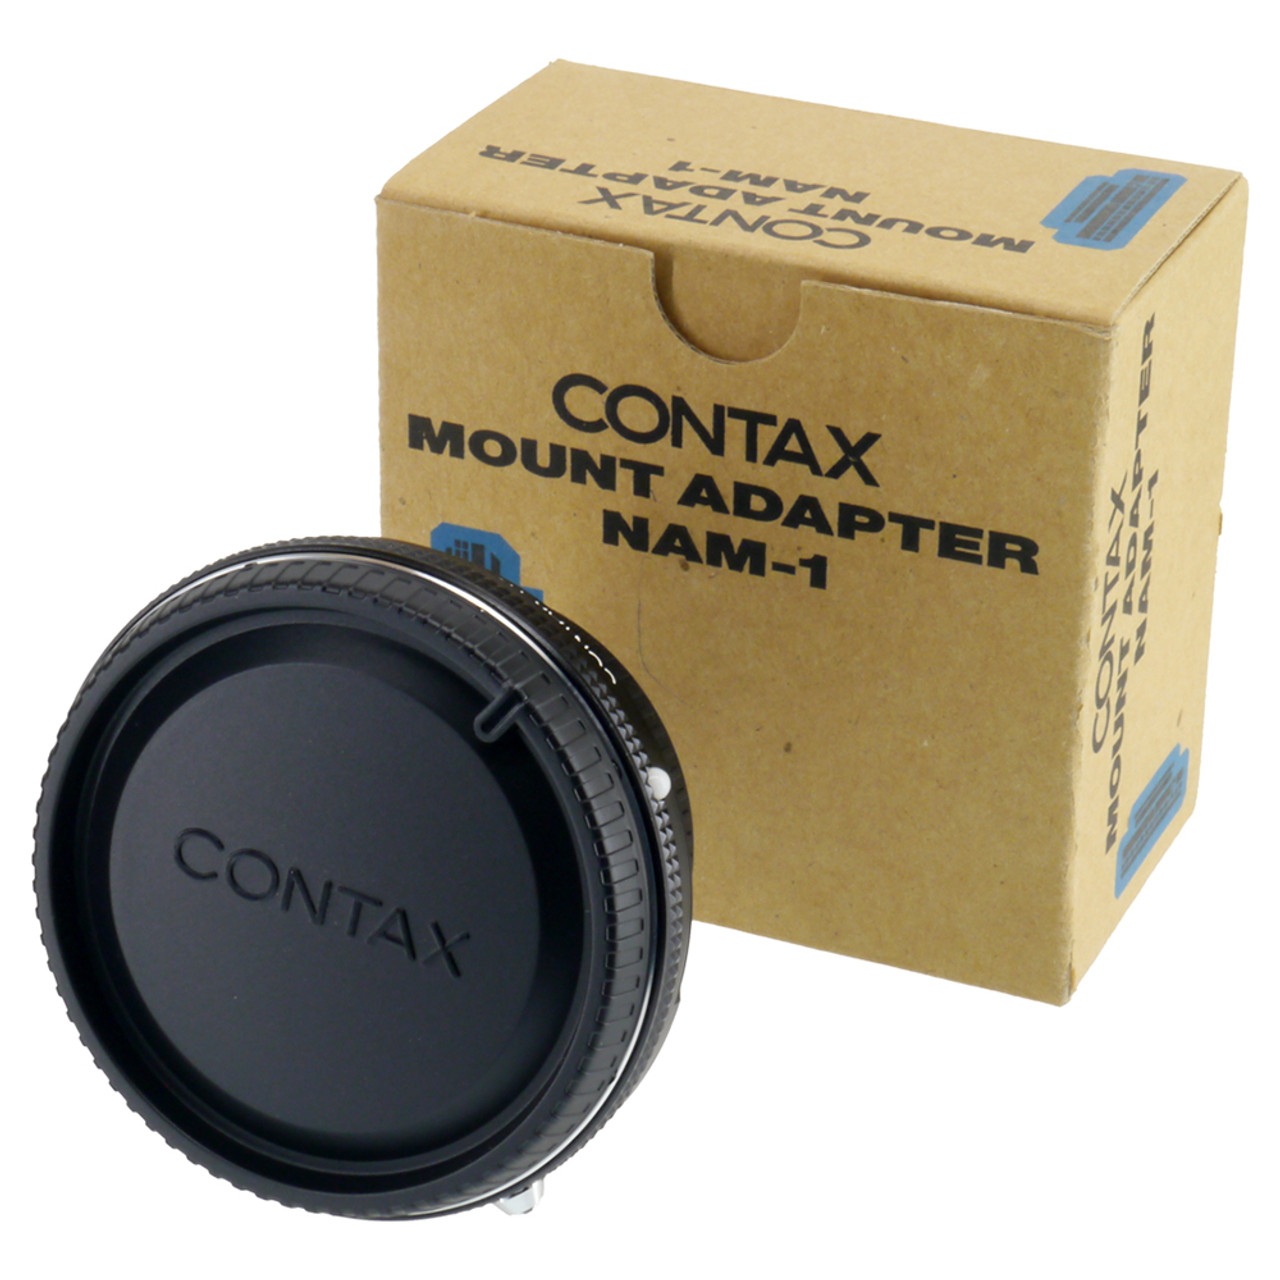 USED CONTAX NAM-1 MOUNT ADAPTER 645>N